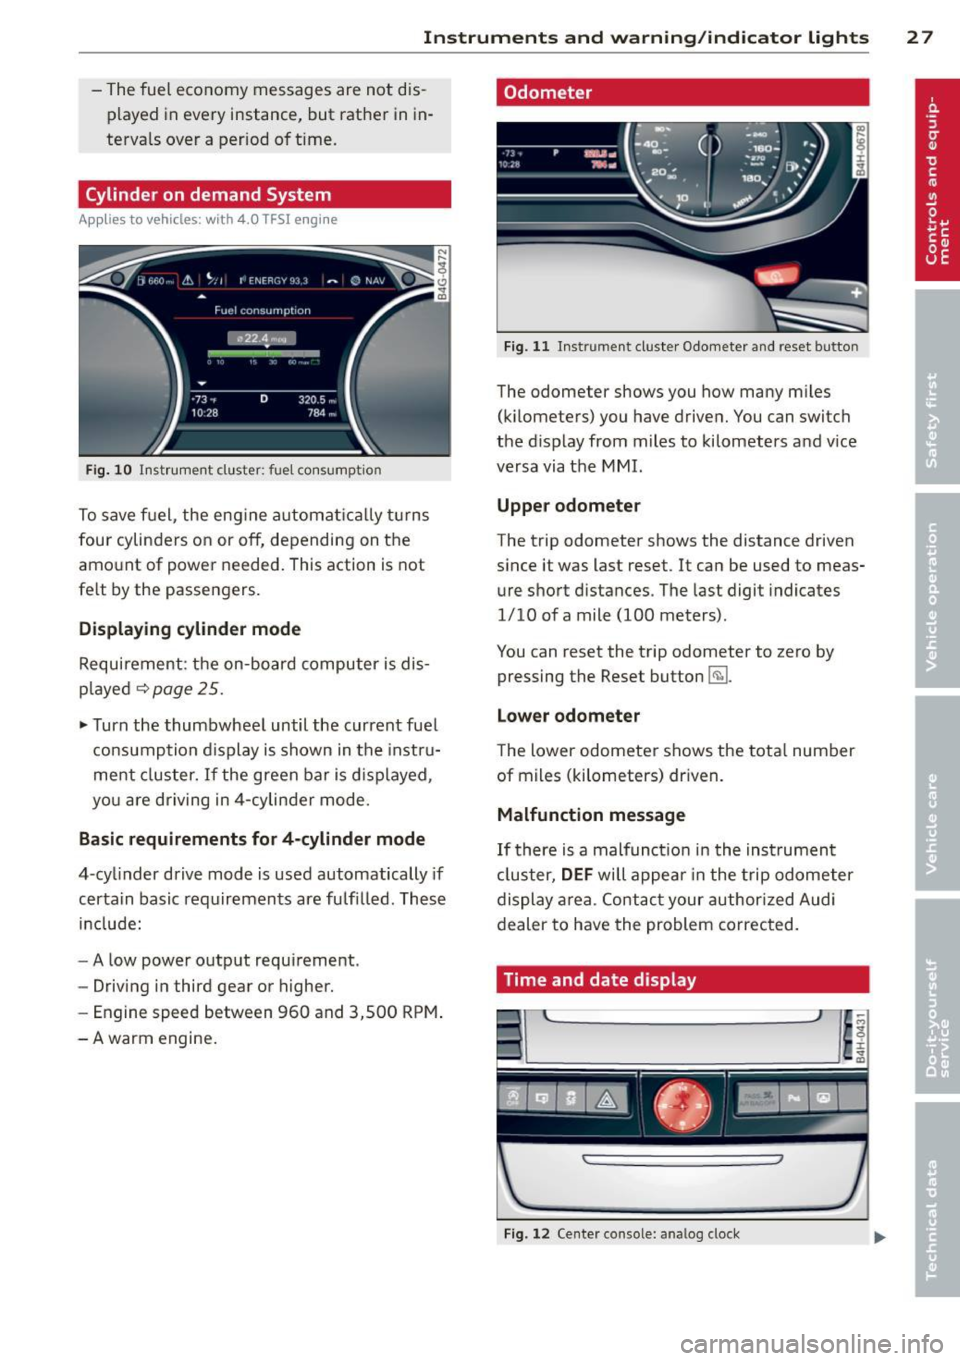 AUDI S8 2014  Owners Manual Instrument s  and  warning /indicator  lights  2  7 
-The fuel  economy  messages are not  dis­
played  in every instance,  but  rathe r in  in­
terva ls 
over a period  o f time. 
Cylinder on  dema